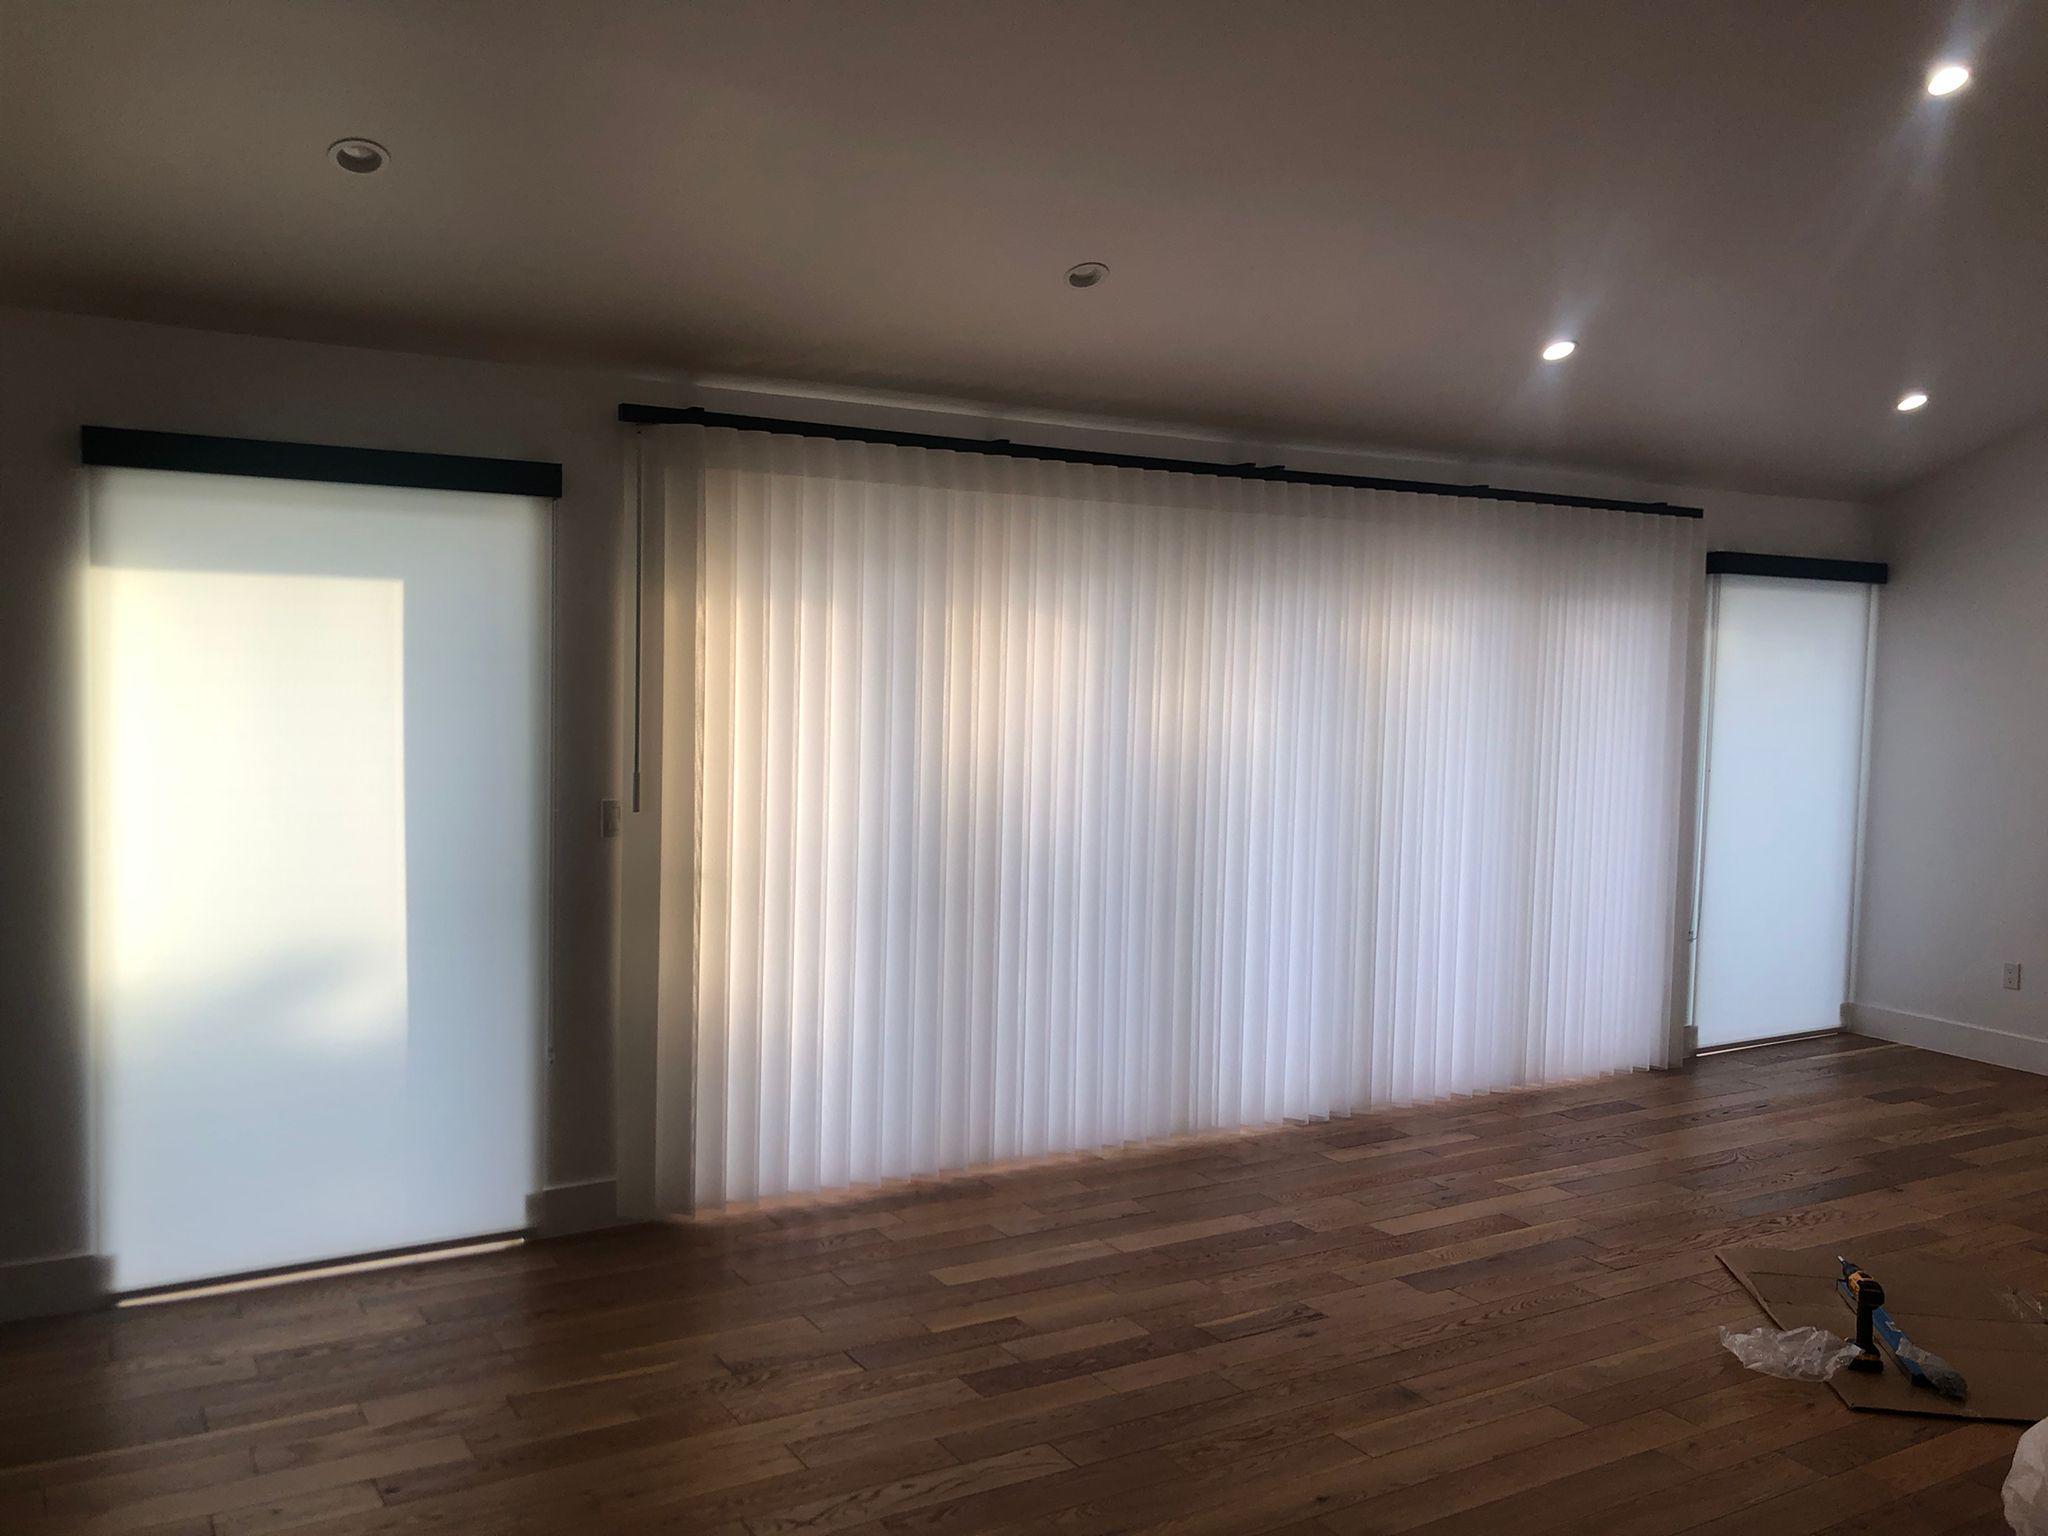 Say goodbye to traditional window coverings and welcome the future of home automation. With the Smart Drapes, you can effortlessly control the amount of light entering your room, creating the perfect ambiance for any occasion.